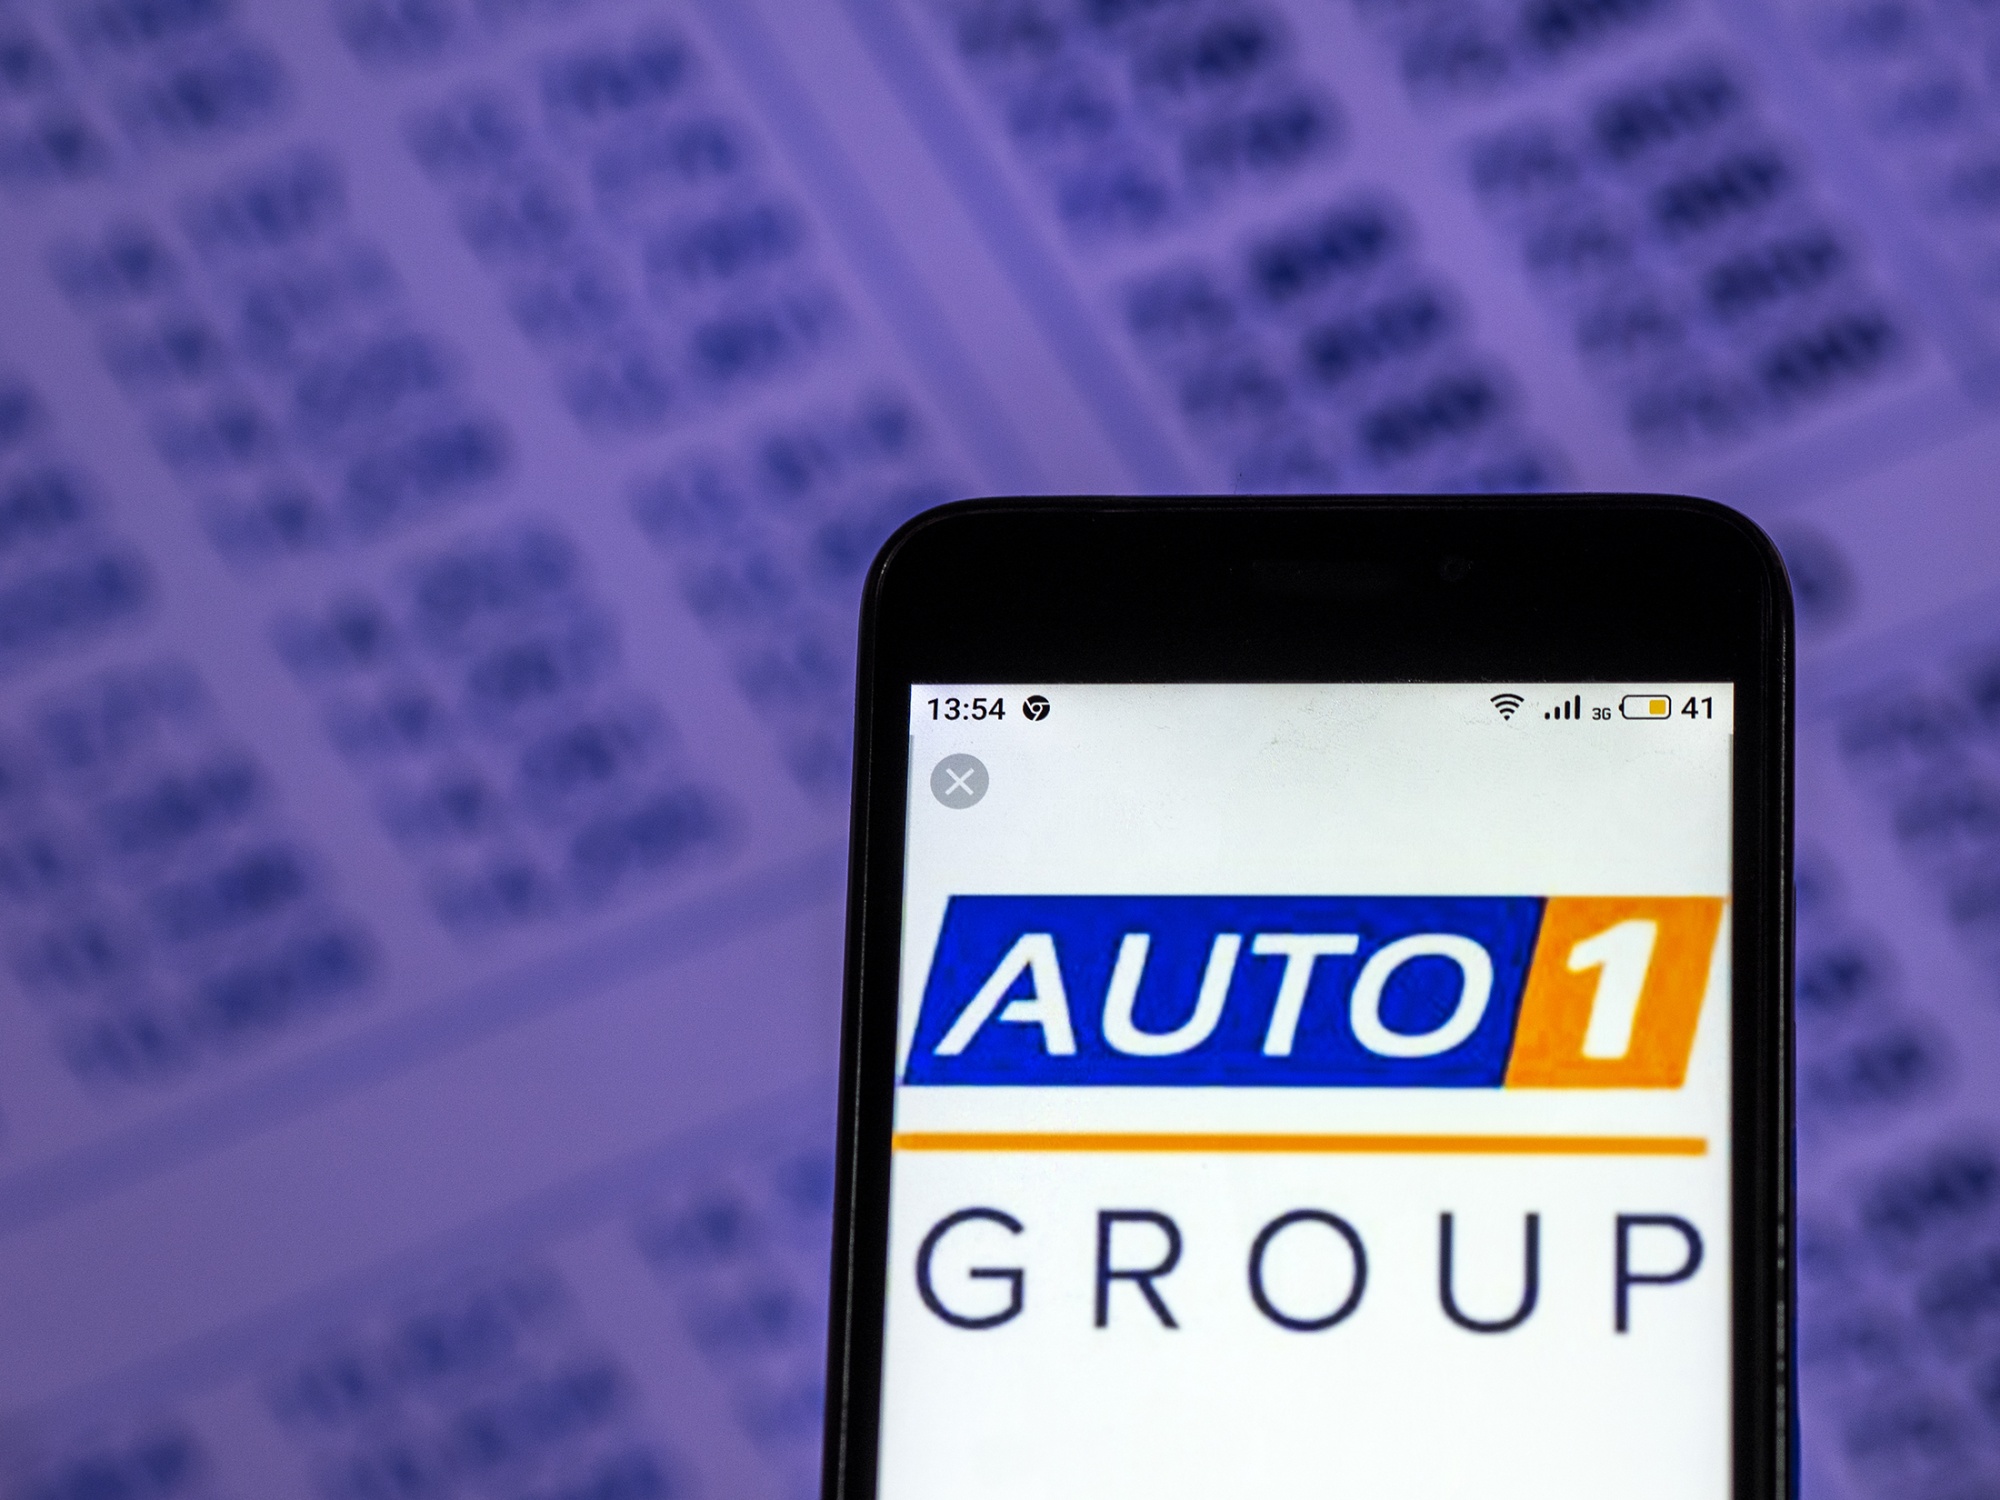 Sequoia and Lone Pine also announced their intention to invest at least € 50 million each in the impending IPO of Auto1.